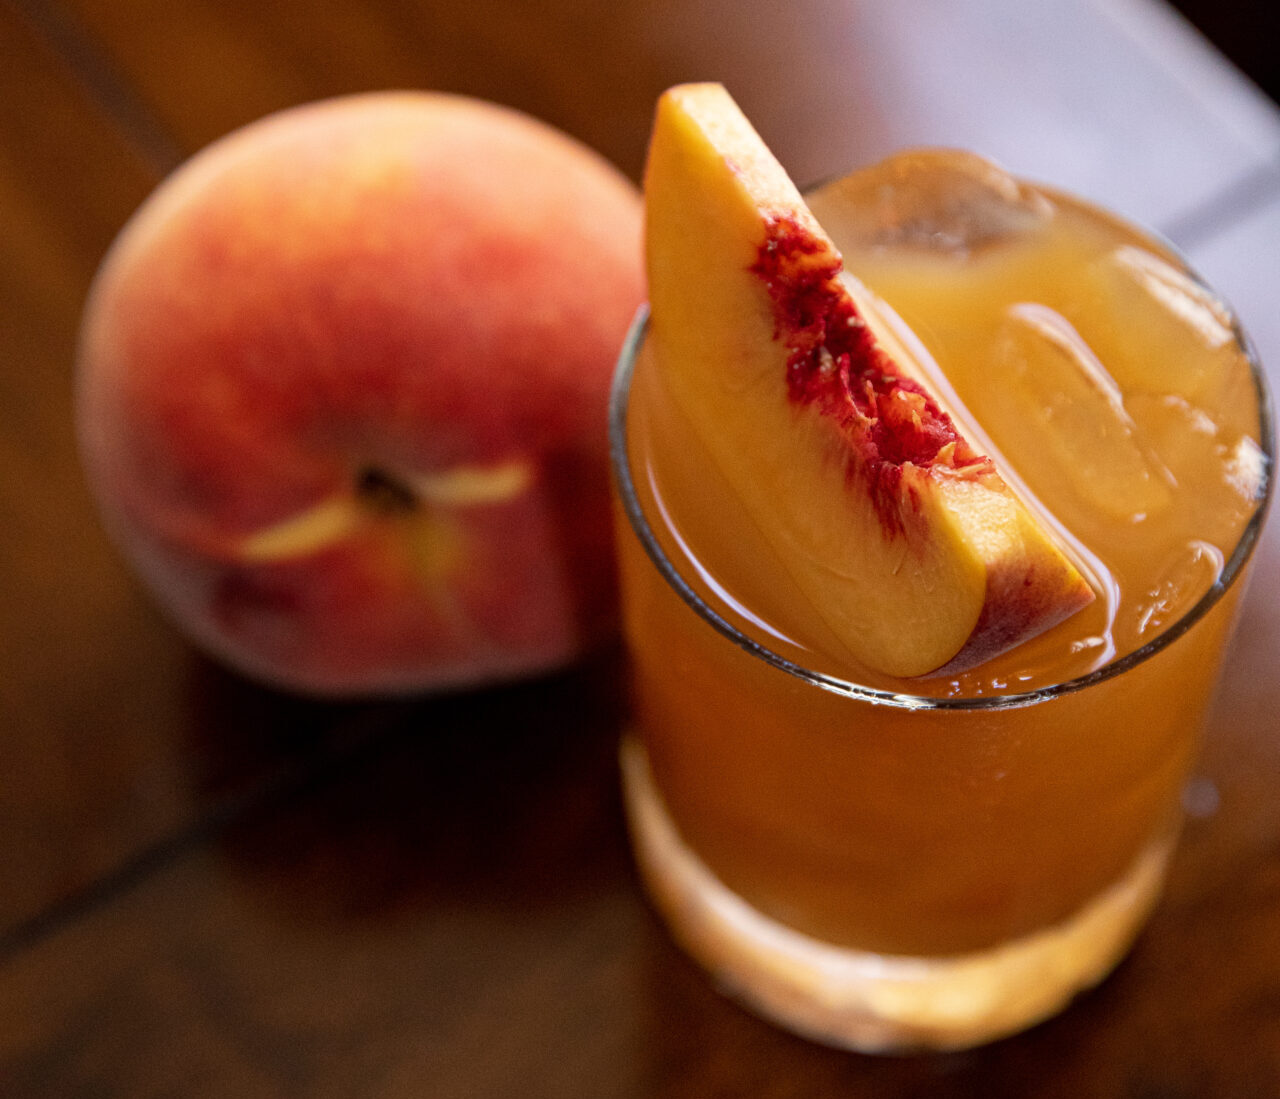 A glass of spirits sits by a peach on a table.